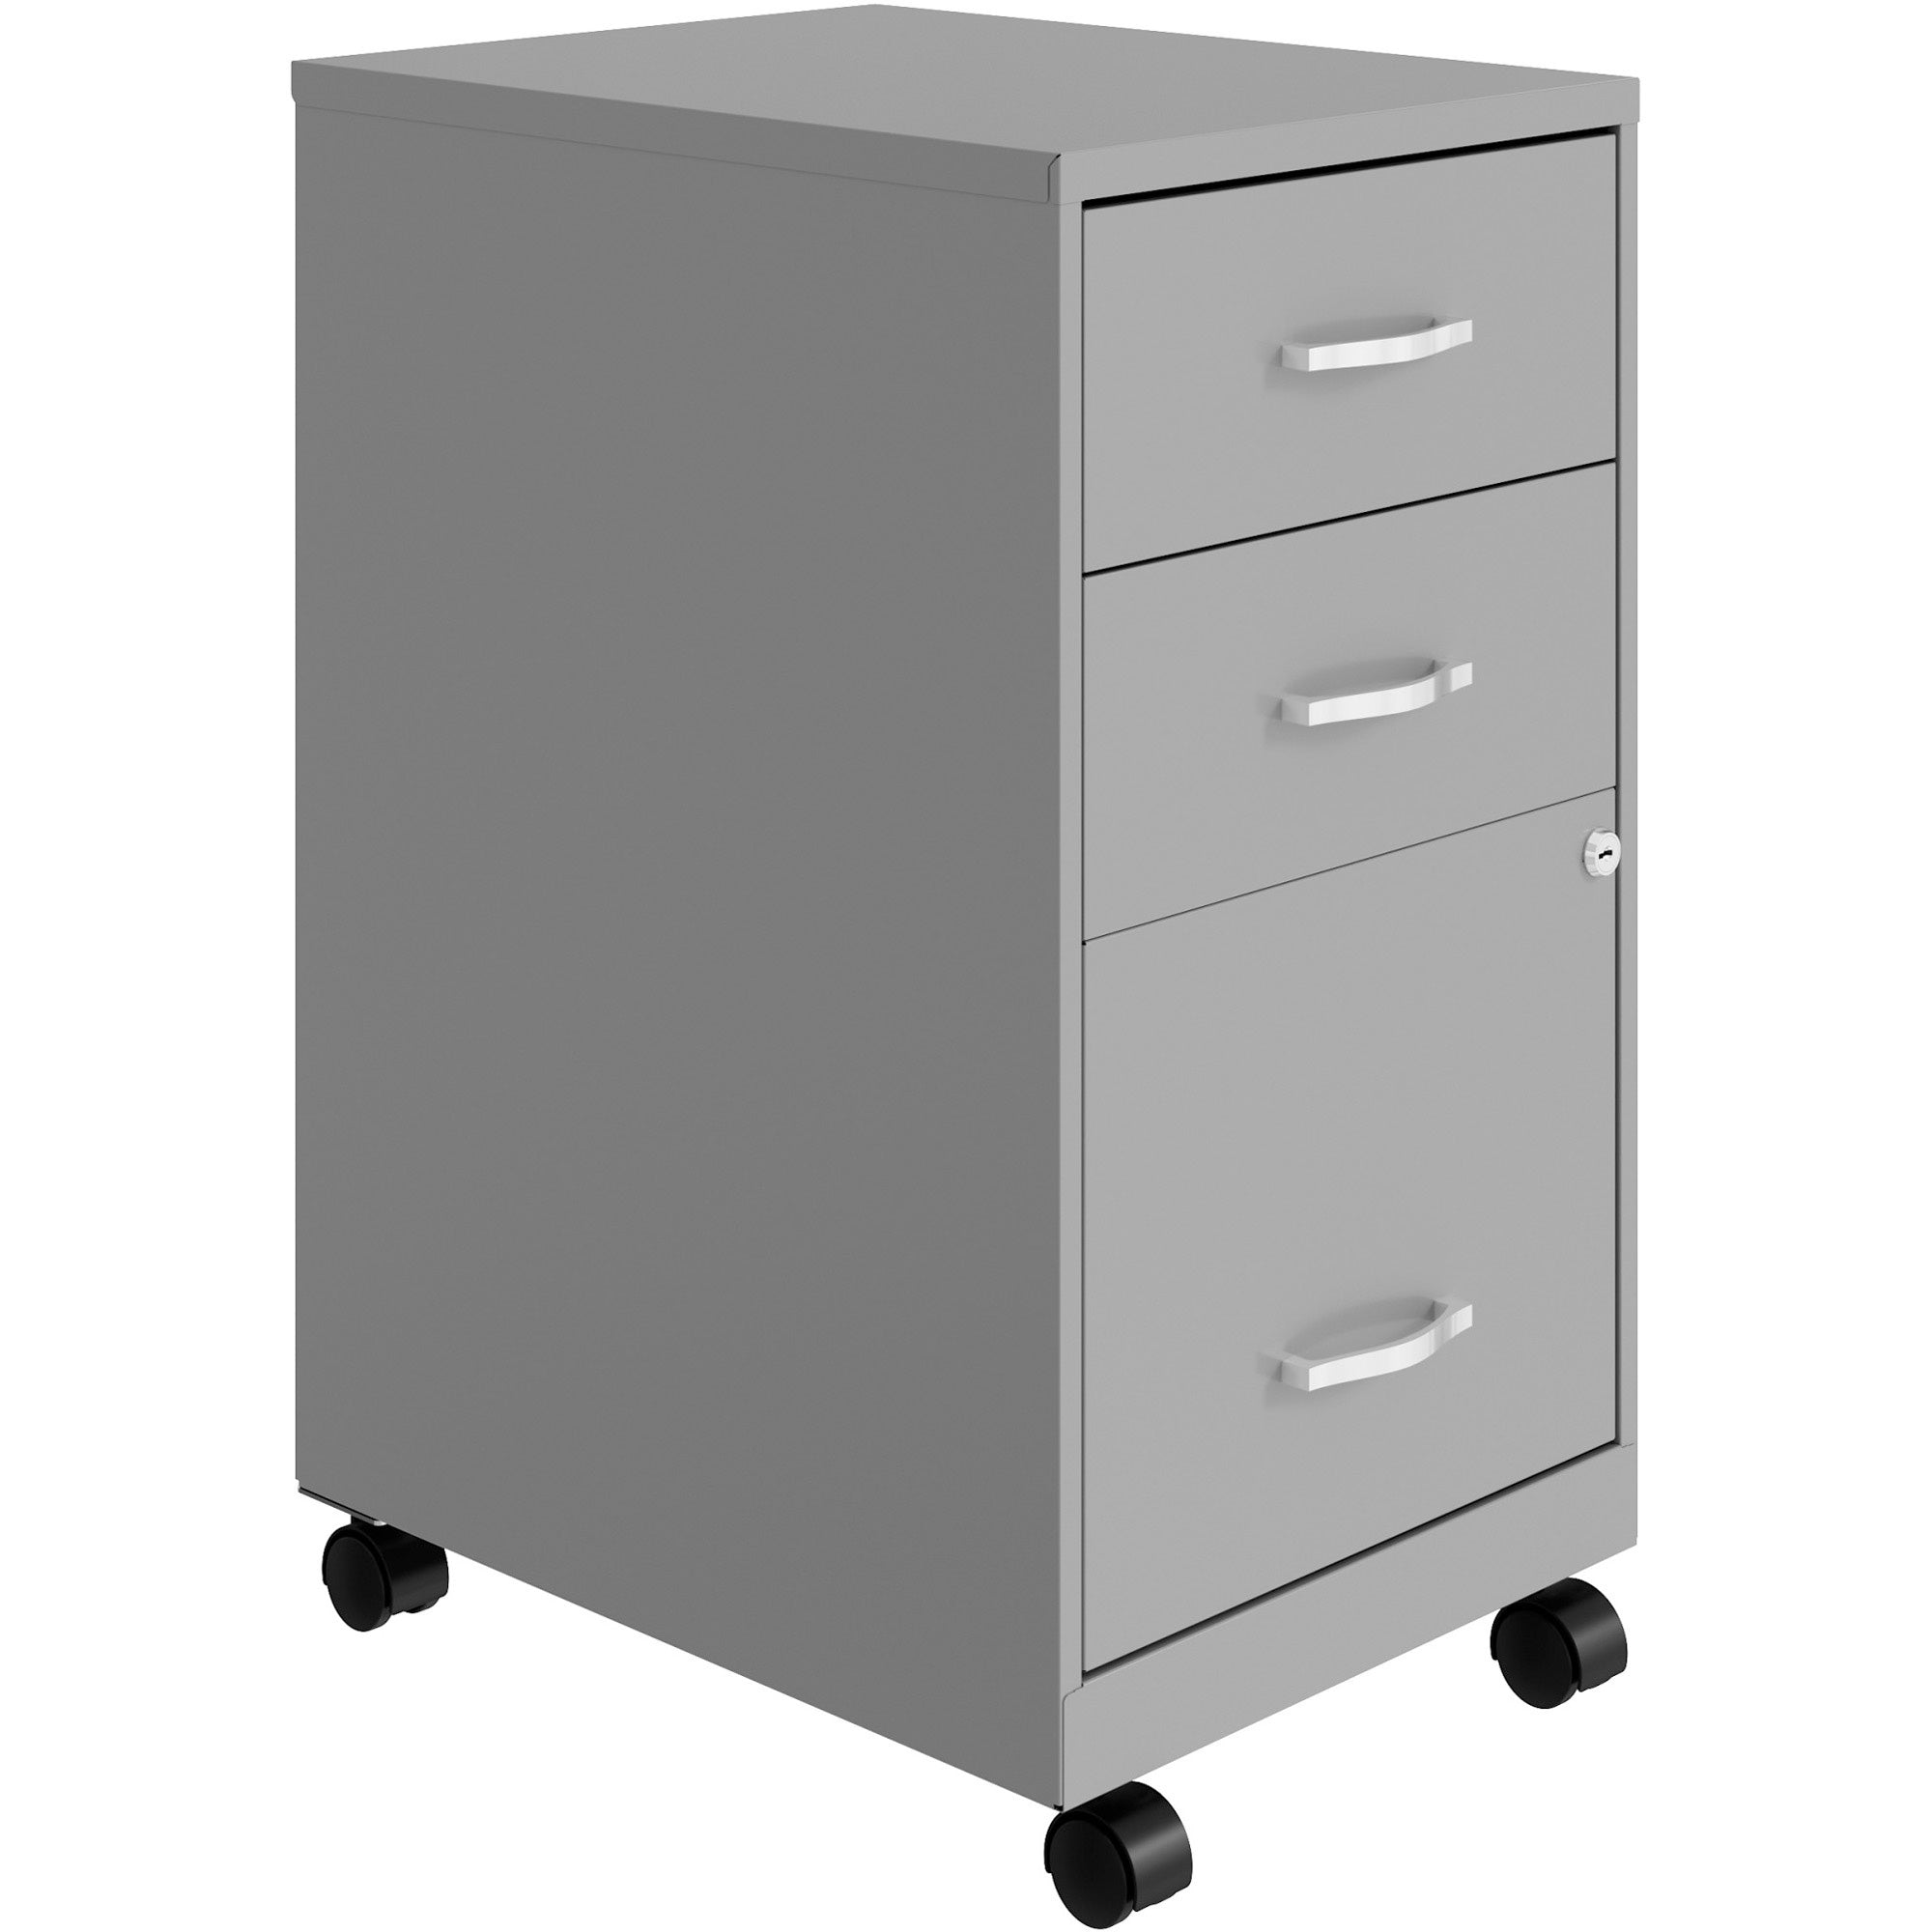 nusparc-3-drawer-organizer-metal-file-cabinet-142-x-18-x-267-3-x-drawers-for-file-box-letter-glide-suspension-3-4-drawer-extension-anti-tip-lockable-mobility-gray-metal-recycled_nprvf318cmsr - 1